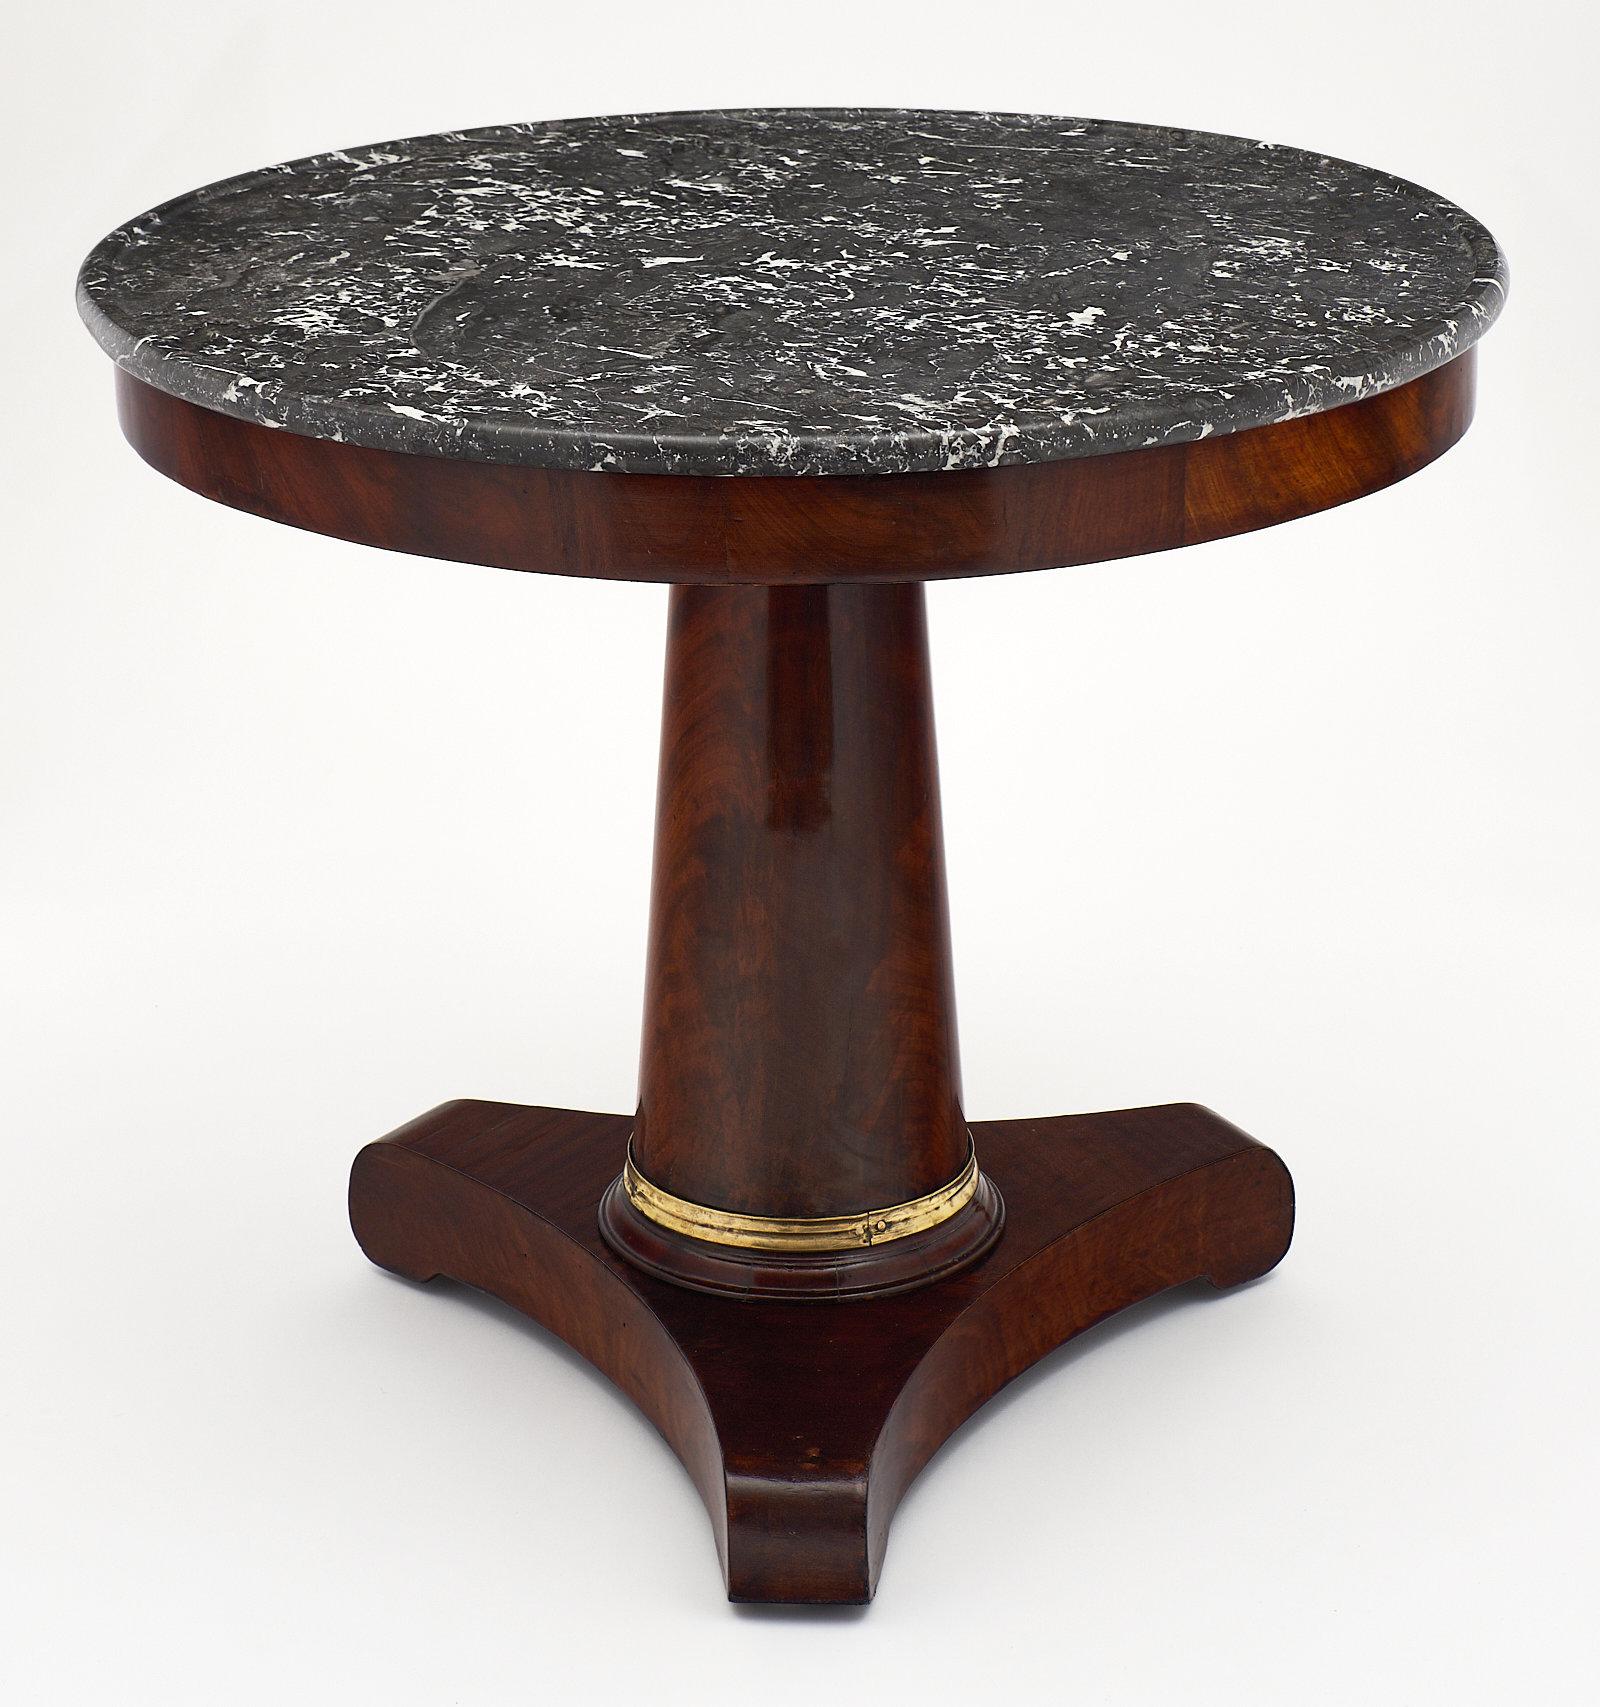 A sleek French Empire period “gueridon” with gray marble top. The base is made of Cuban flamed Mahogany with a tripod center foot. It has been finished with a lustrous French polish. We loved the Saint Anne gray marble top and the gilt bronze accent.